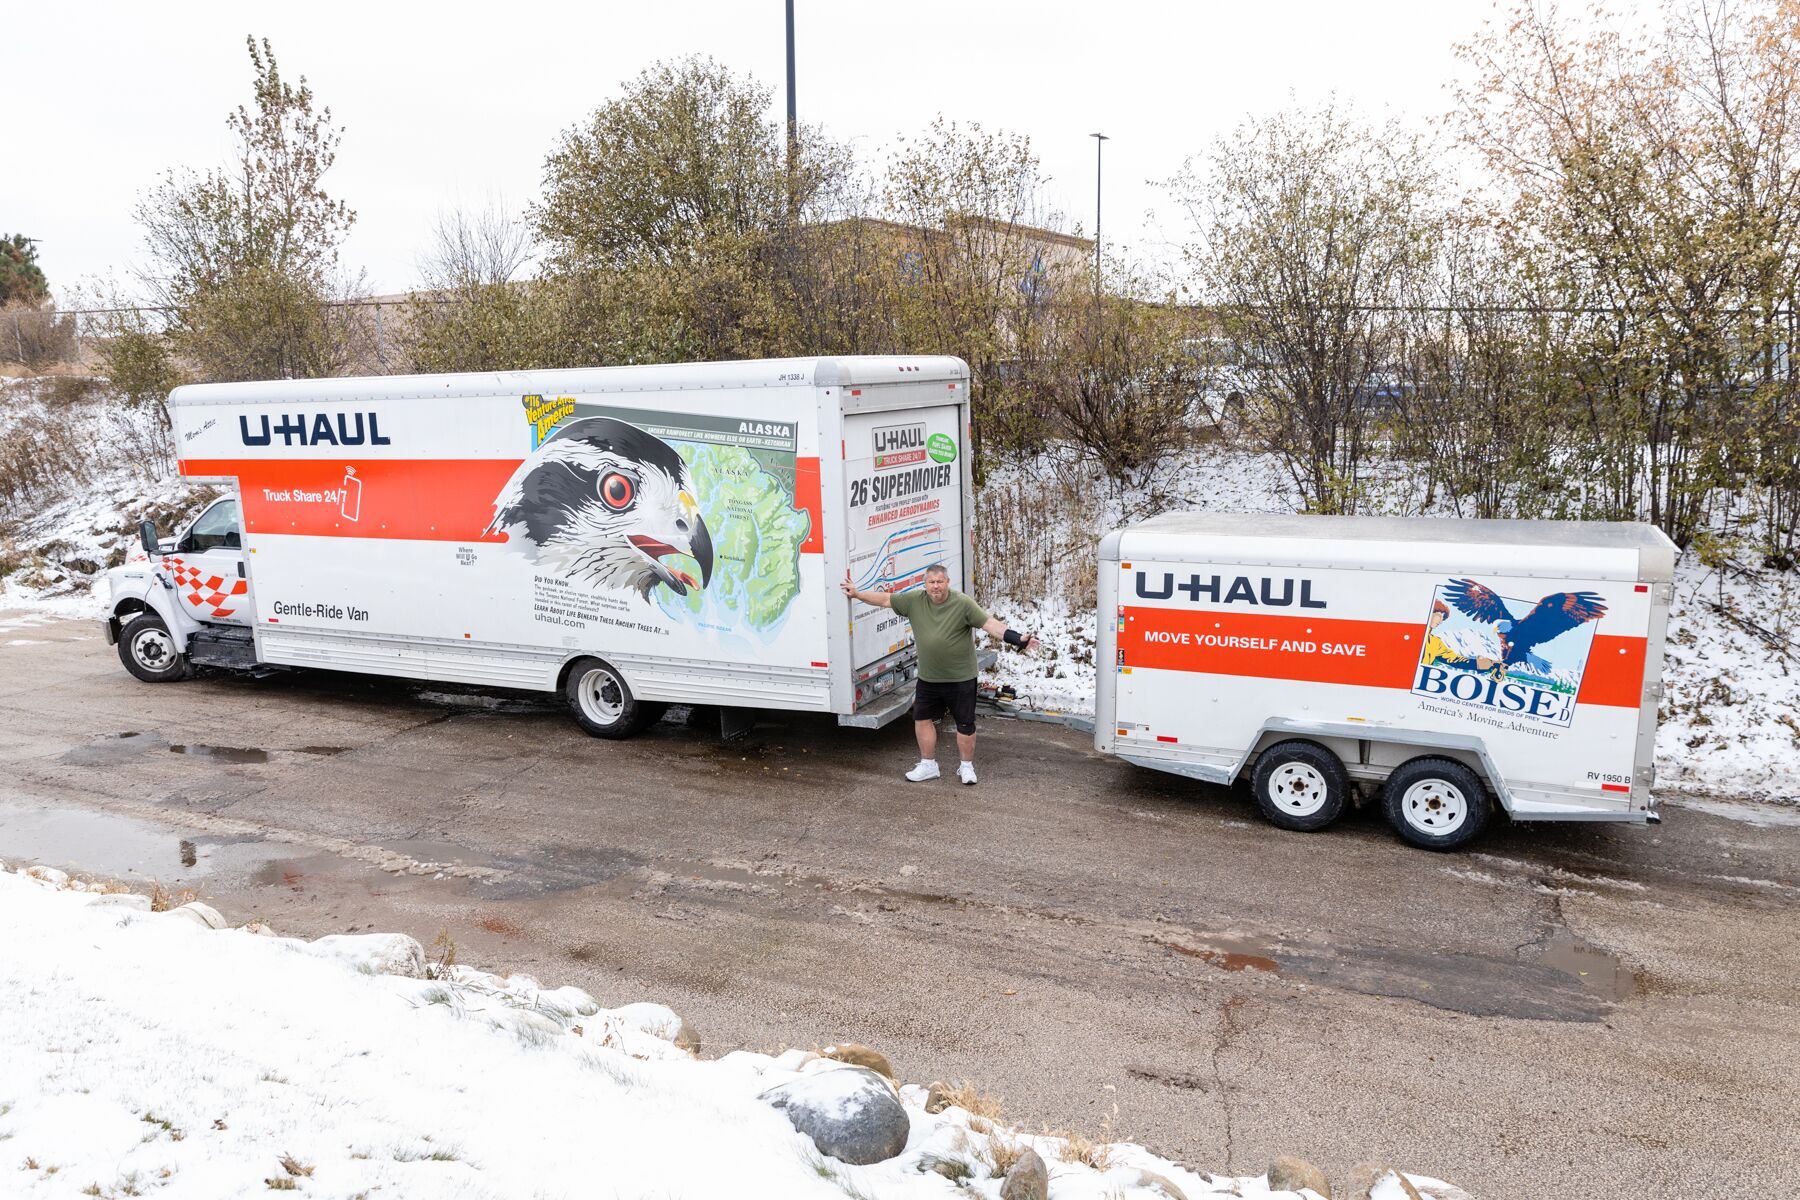 Small Move Experts